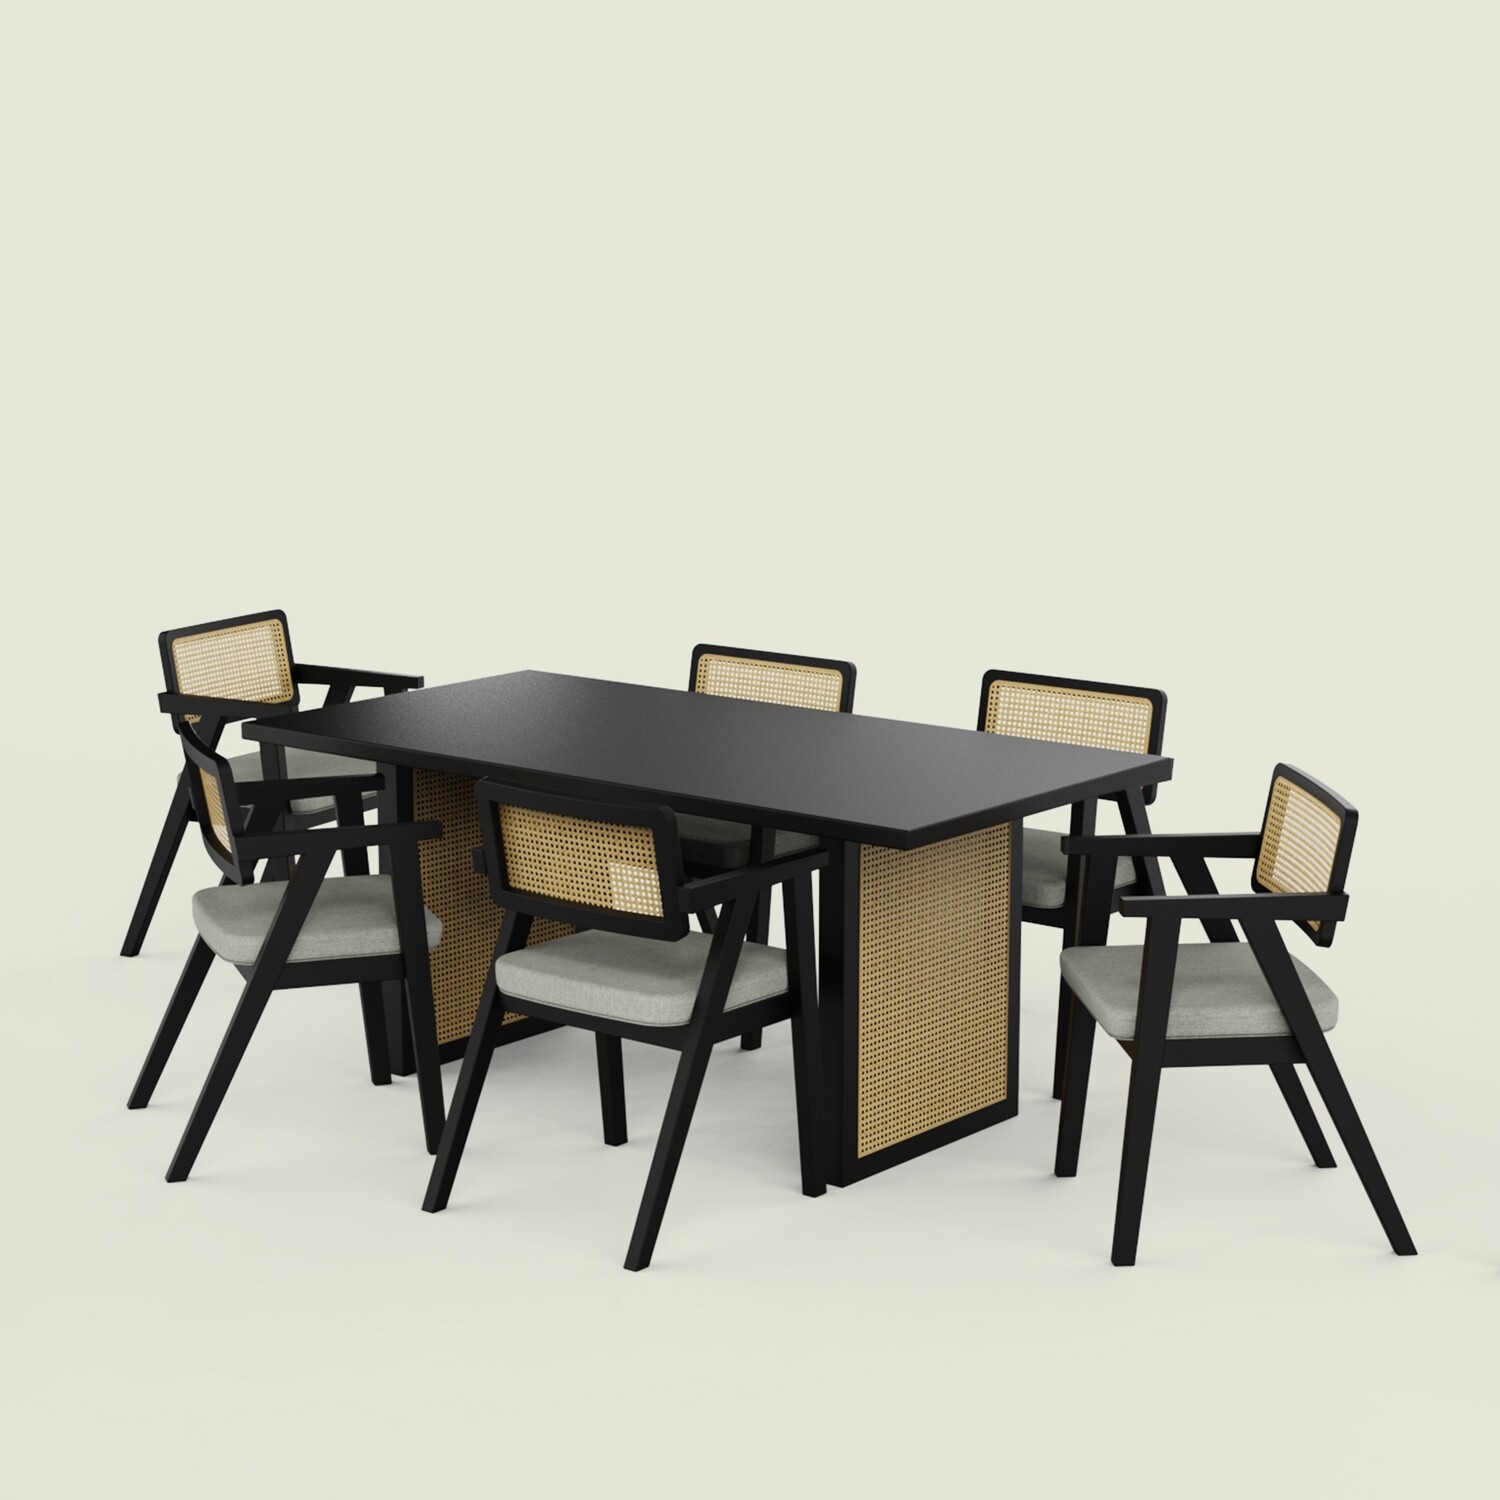 Stanley Luxury Dining Table Set with Bob chair - 6 Seater/175cm